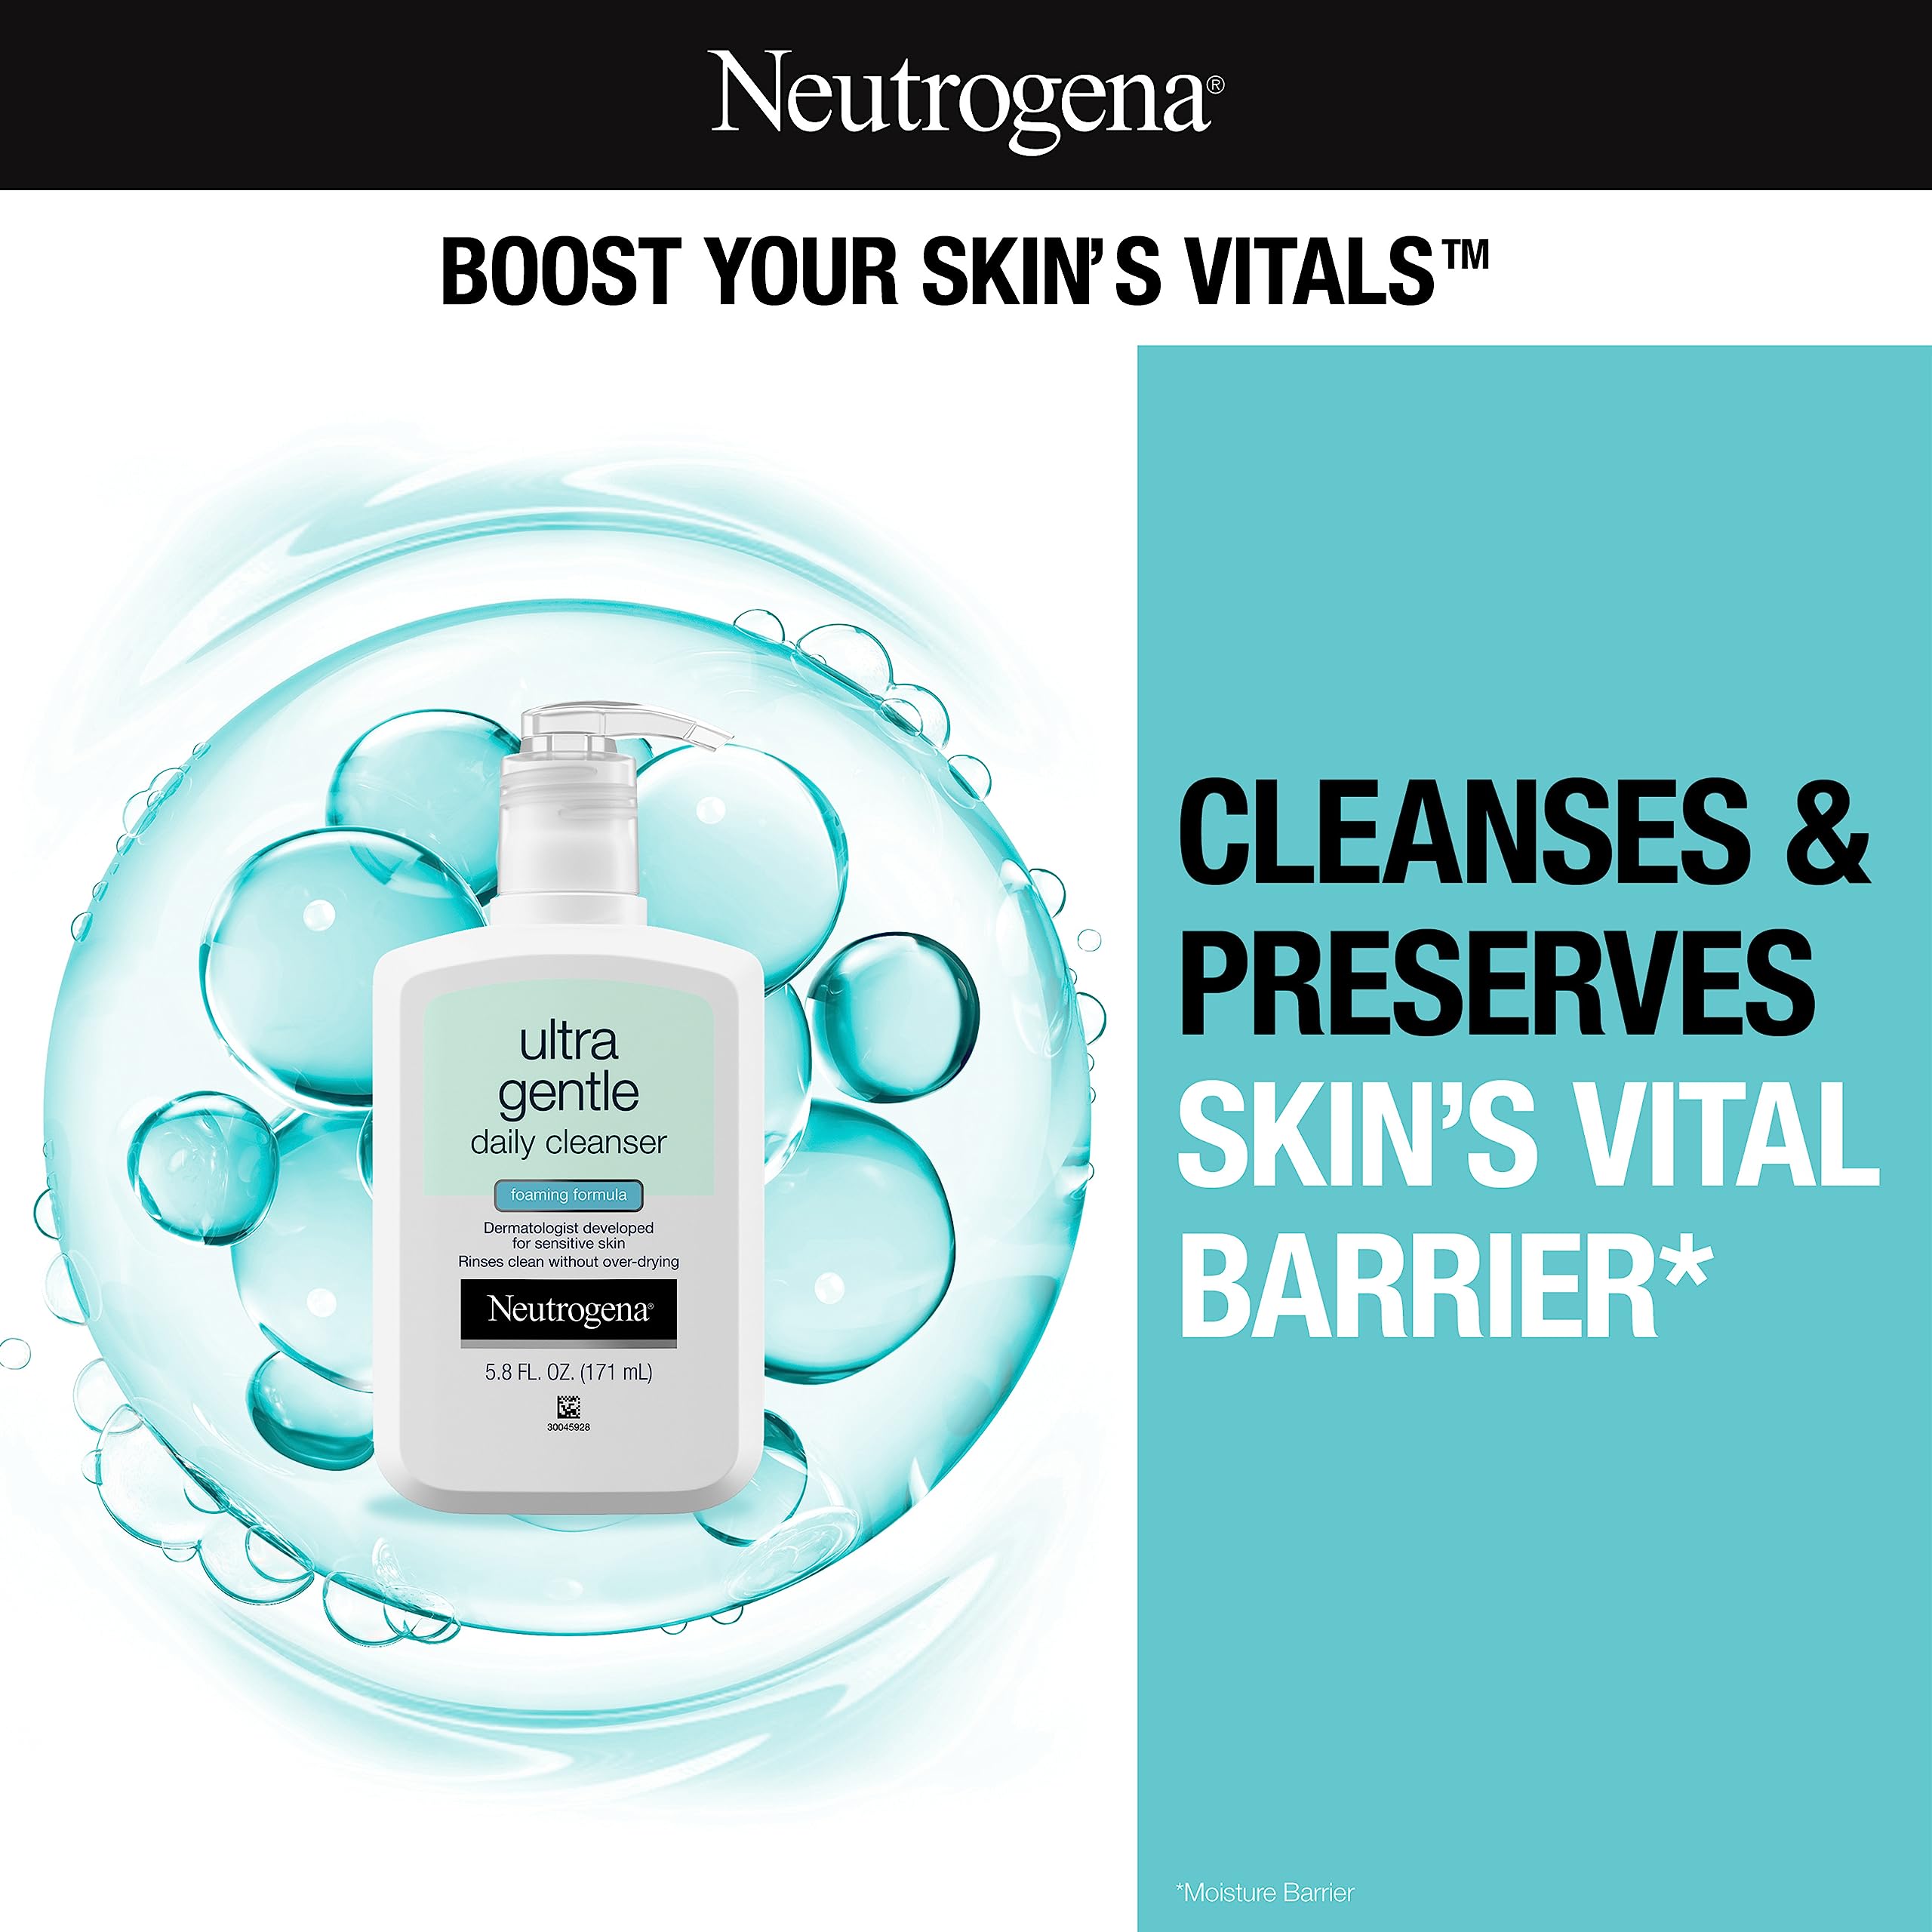 Neutrogena Ultra Gentle Foaming Facial Cleanser, Hydrating Face Wash for Sensitive Skin, Gently Cleanses Face Without Over Drying, Oil-Free, Soap-Free, 5.8 fl. oz